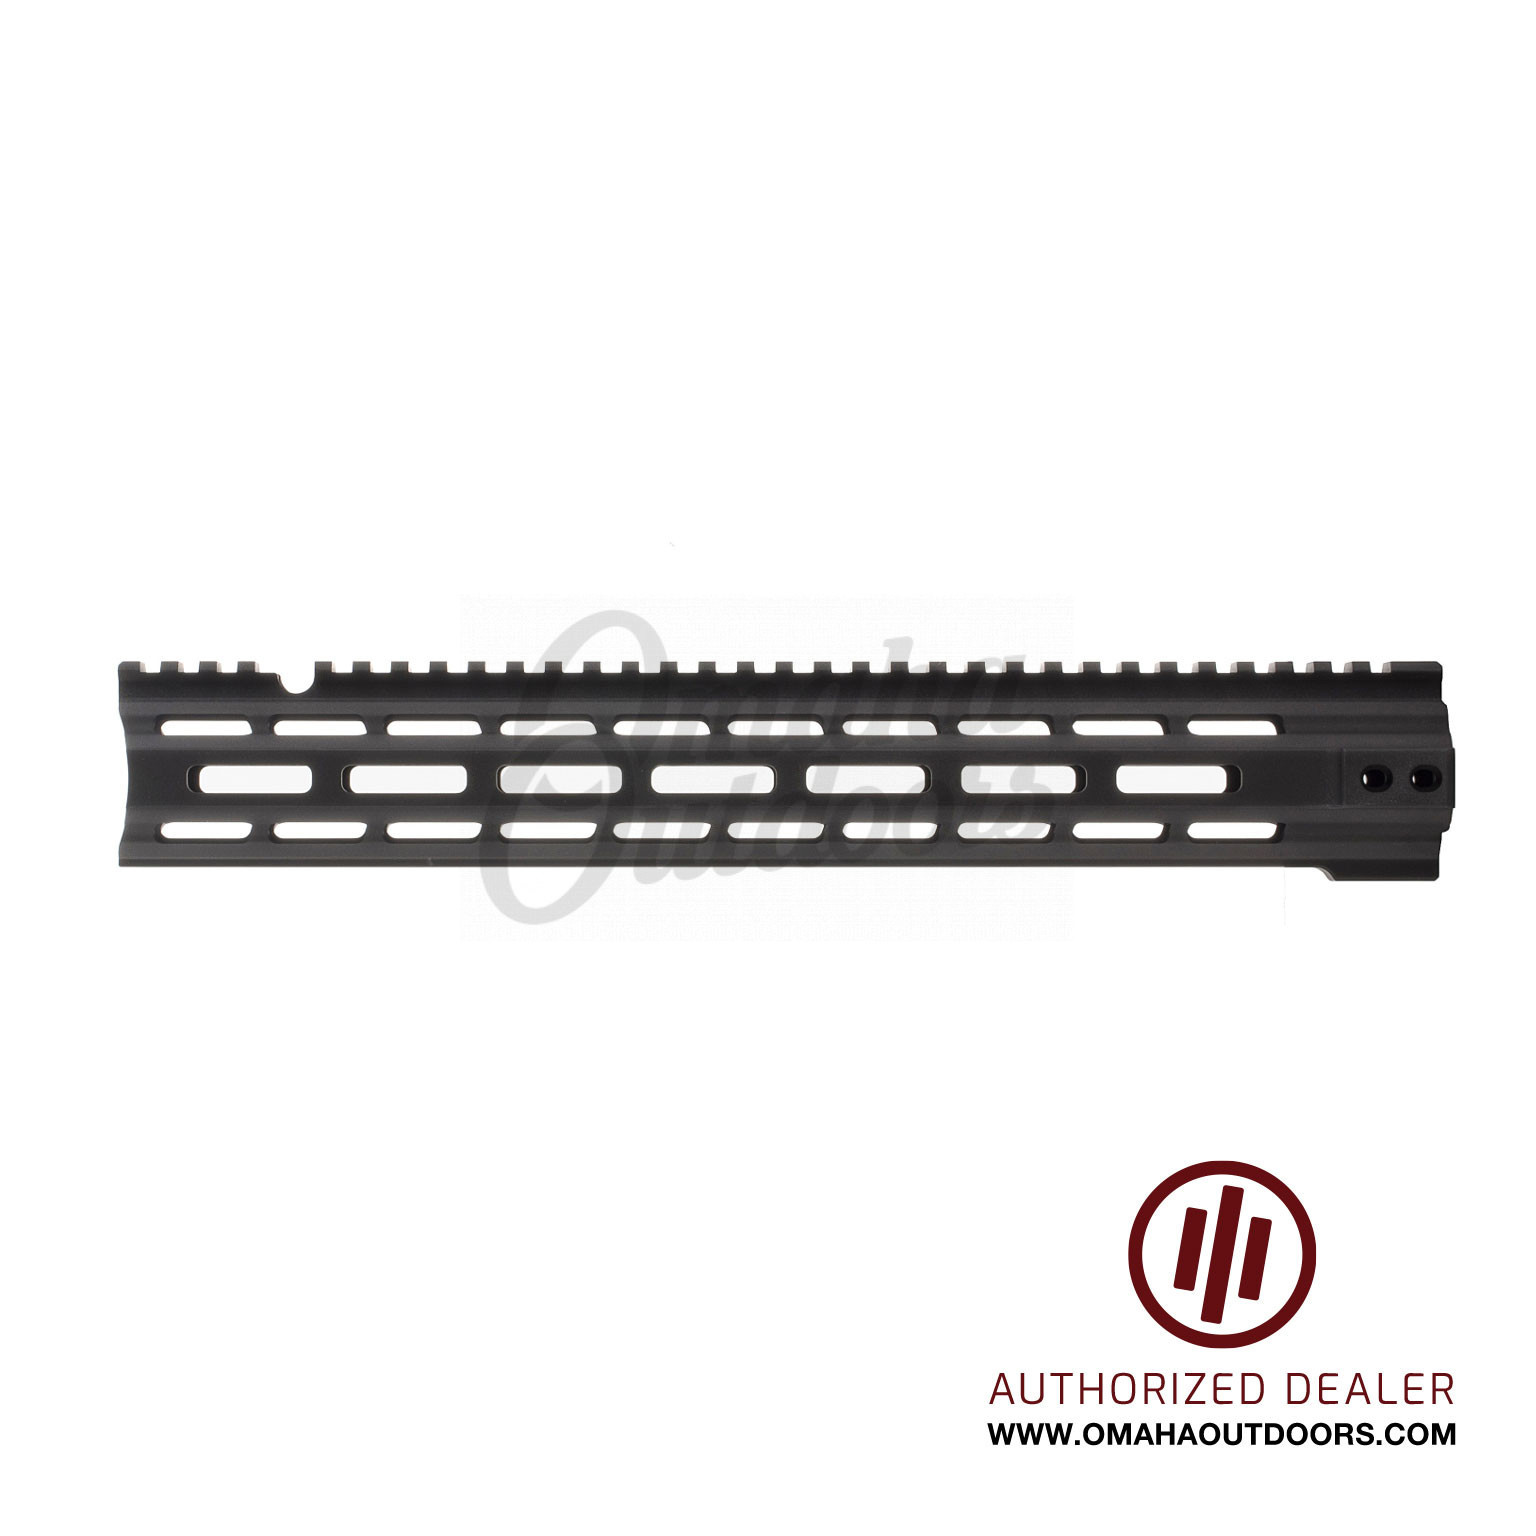 PWS MK114 MOD 1 Handguard - Primary Weapons Systems